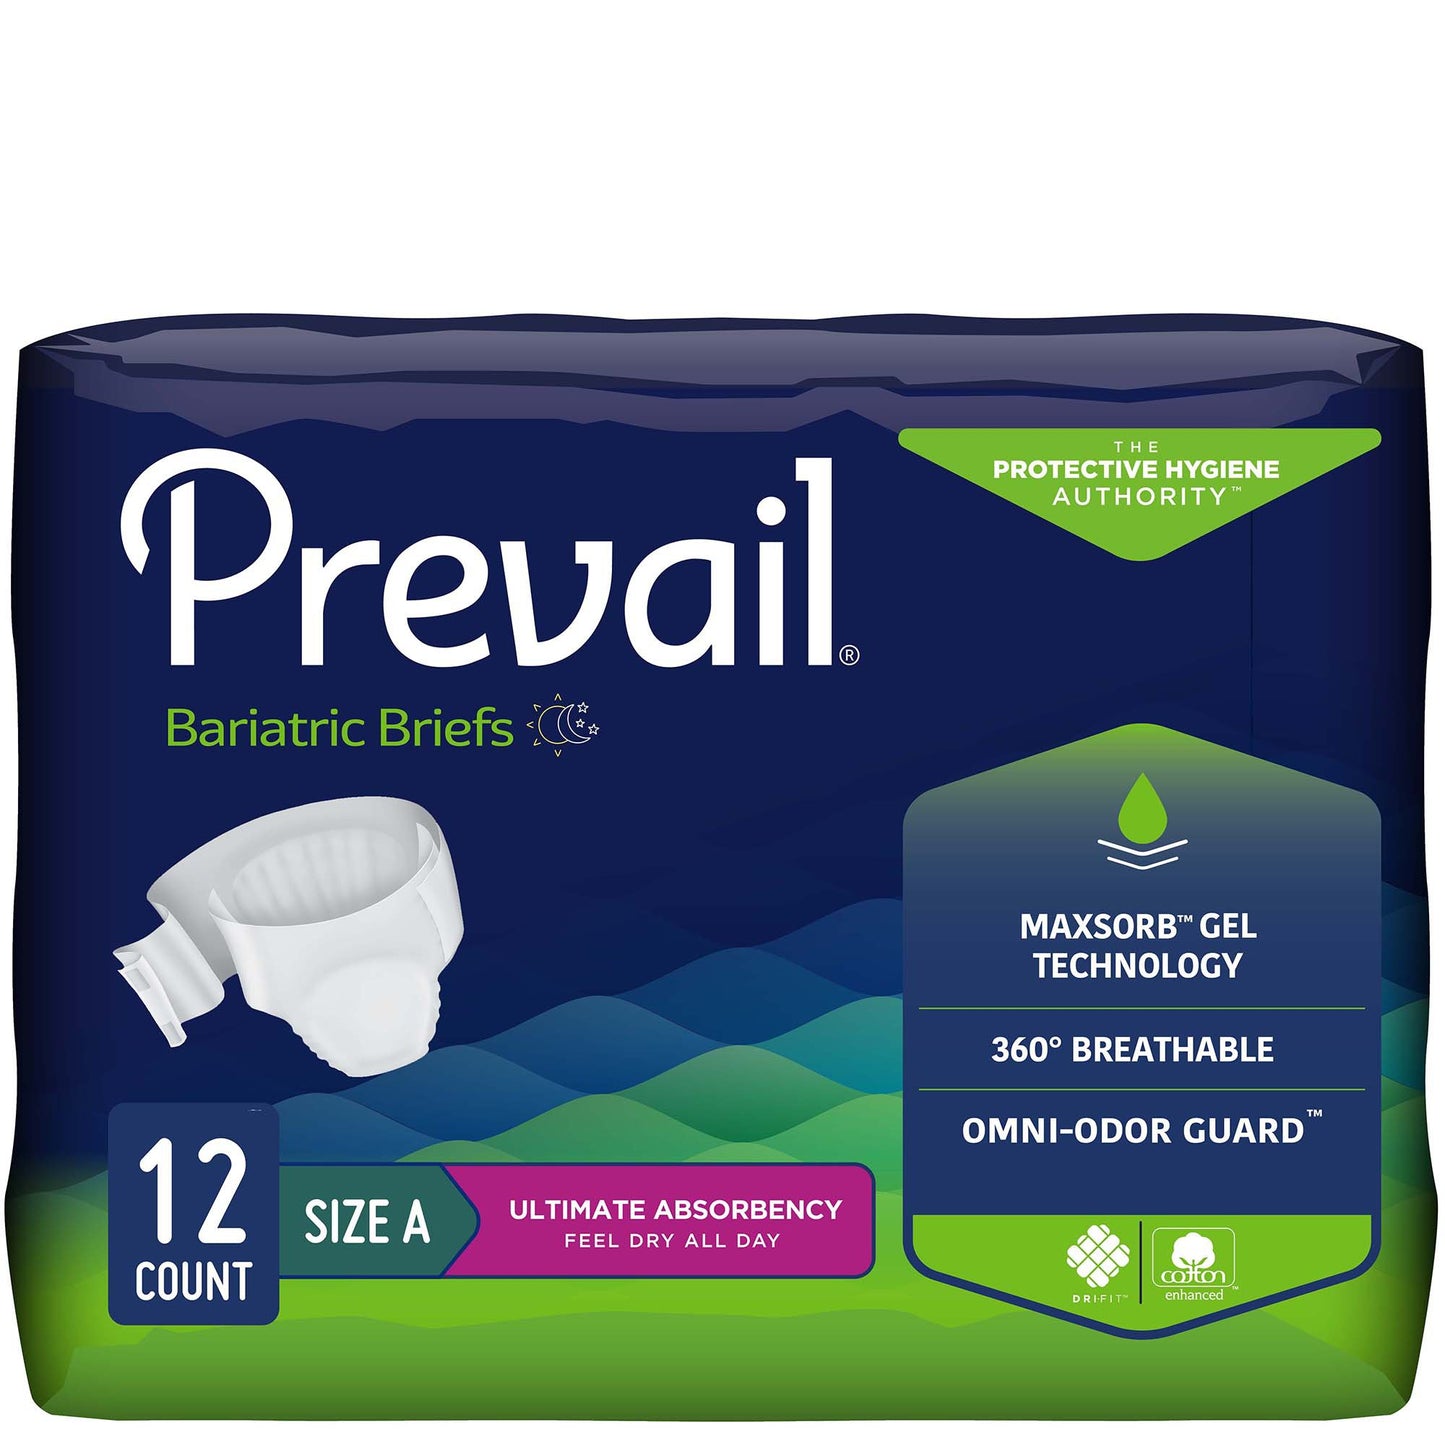 Prevail® Bariatric Ultimate Incontinence Brief, Size A, 48 ct.